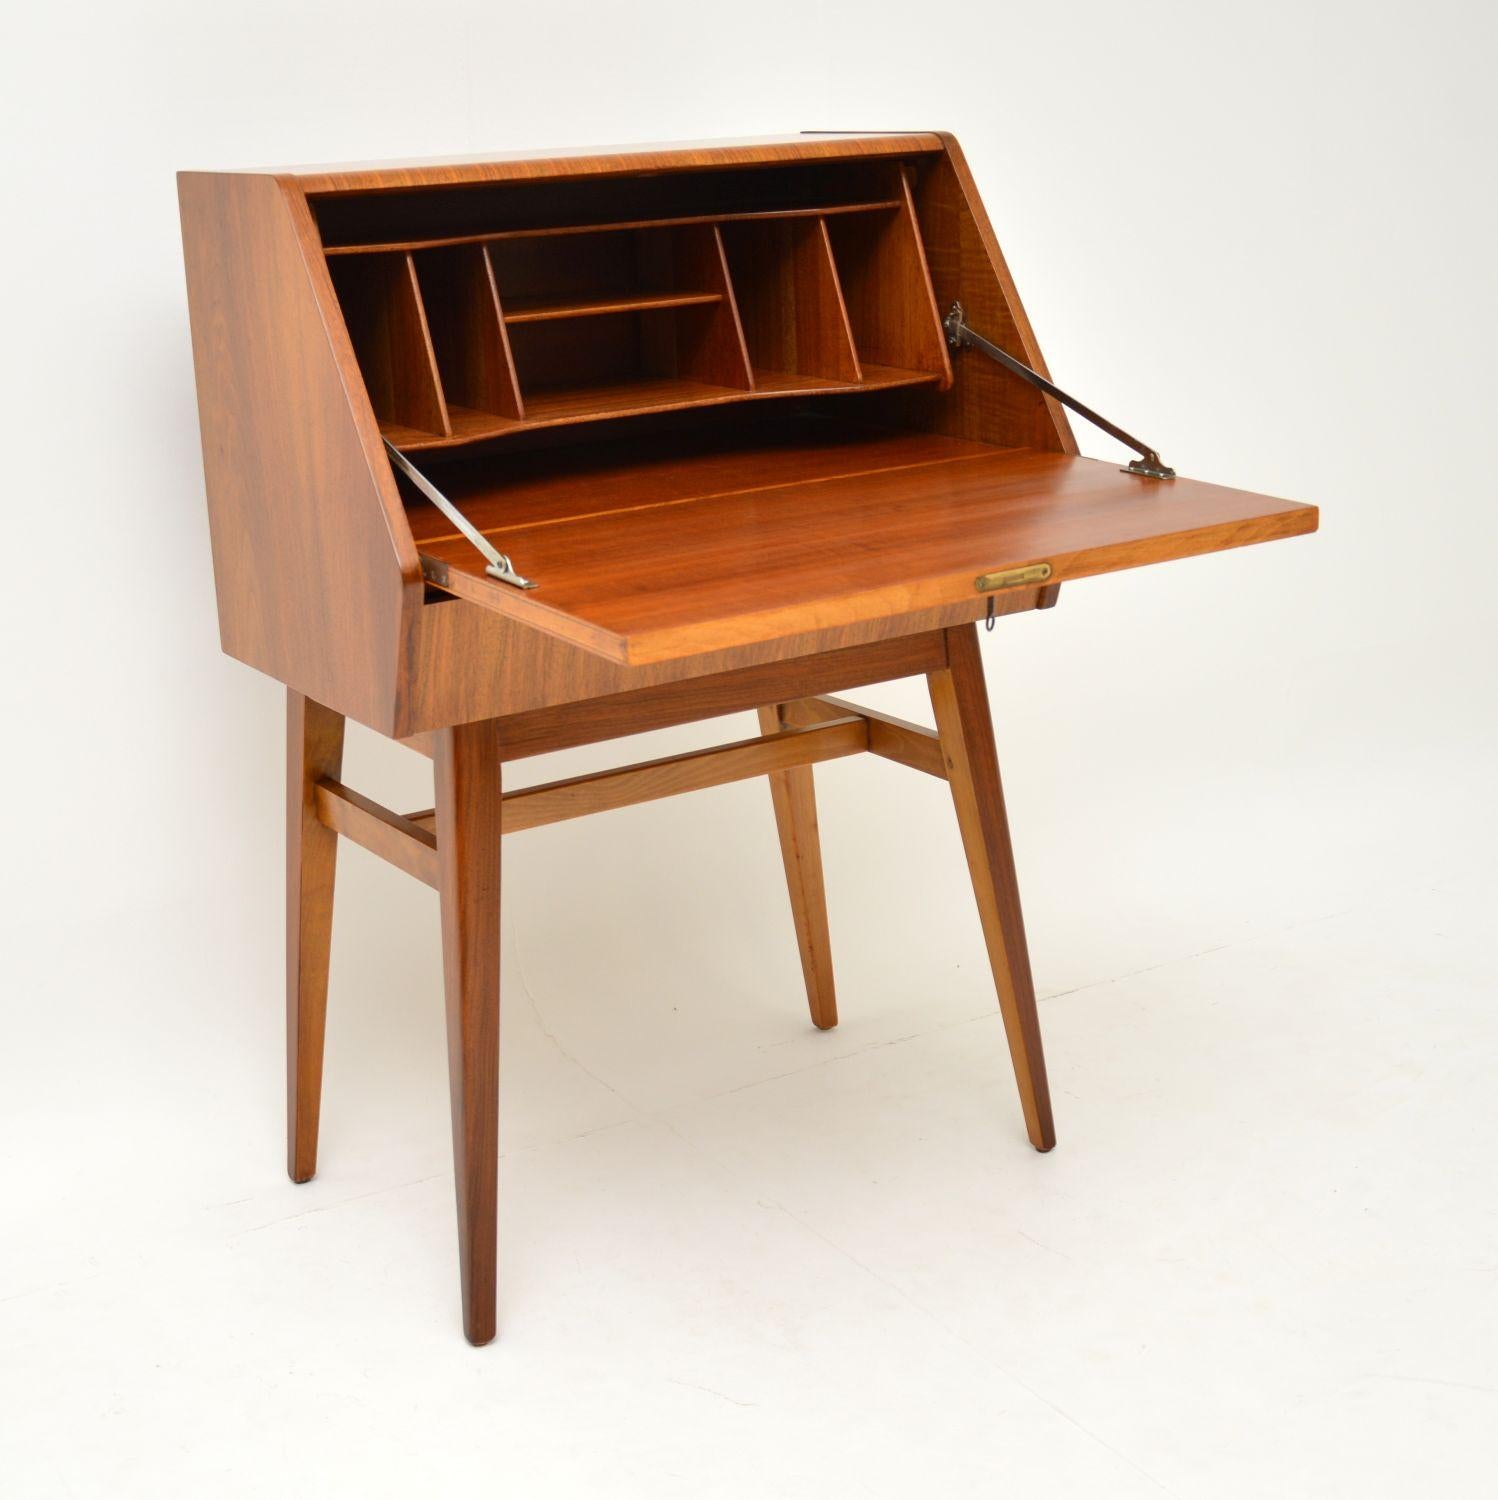 A stunning vintage bureau in walnut, this dates from the 1950s-1960s. It is of super quality, with a beautiful angular design. There is a locking key, a lower drawer and this has ample writing/storage space for such an elegant compact design. We